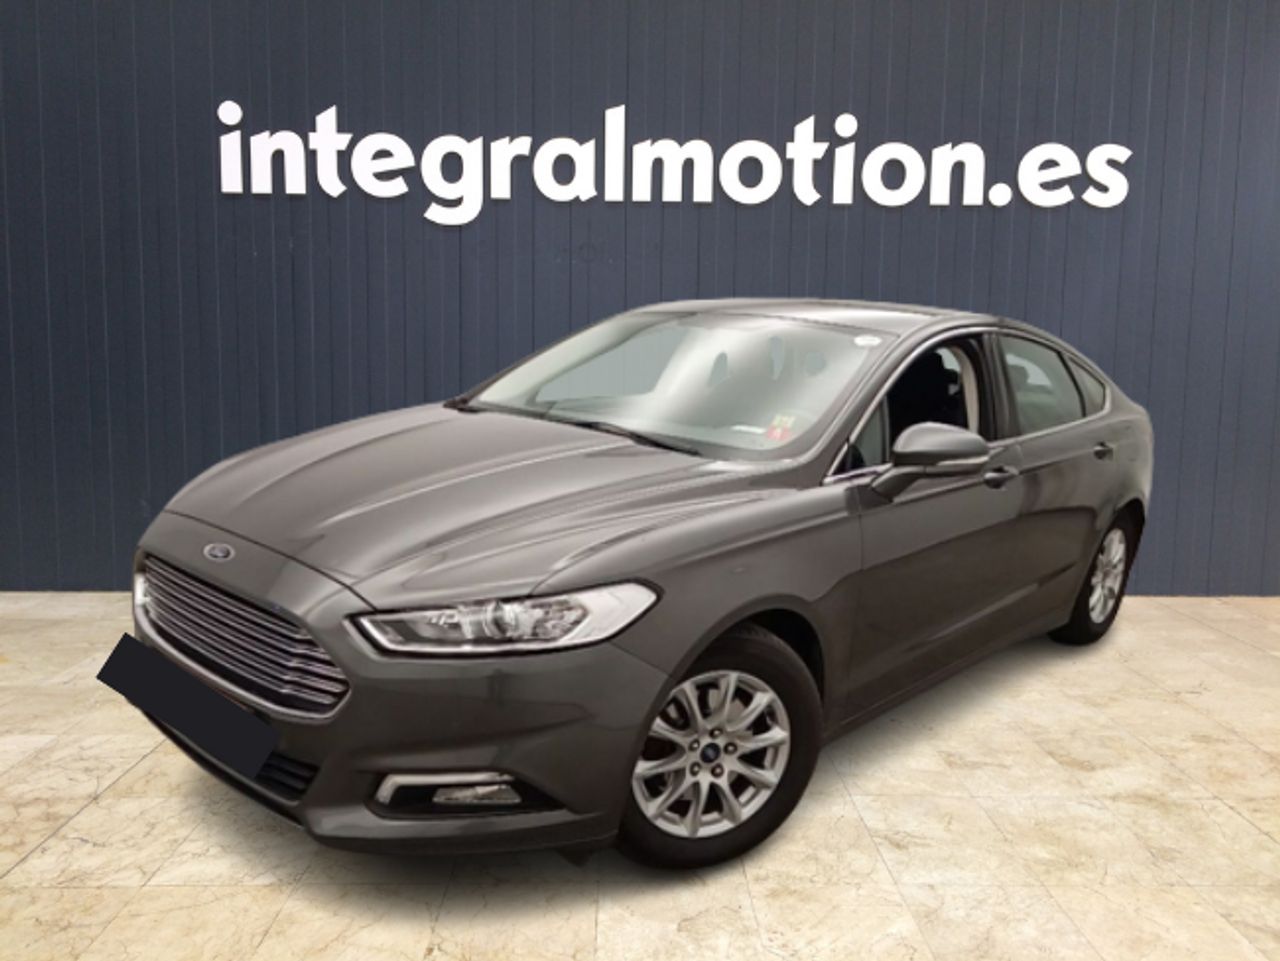 Ford Mondeo 								1.5 TDCi 88kW (120CV) Business